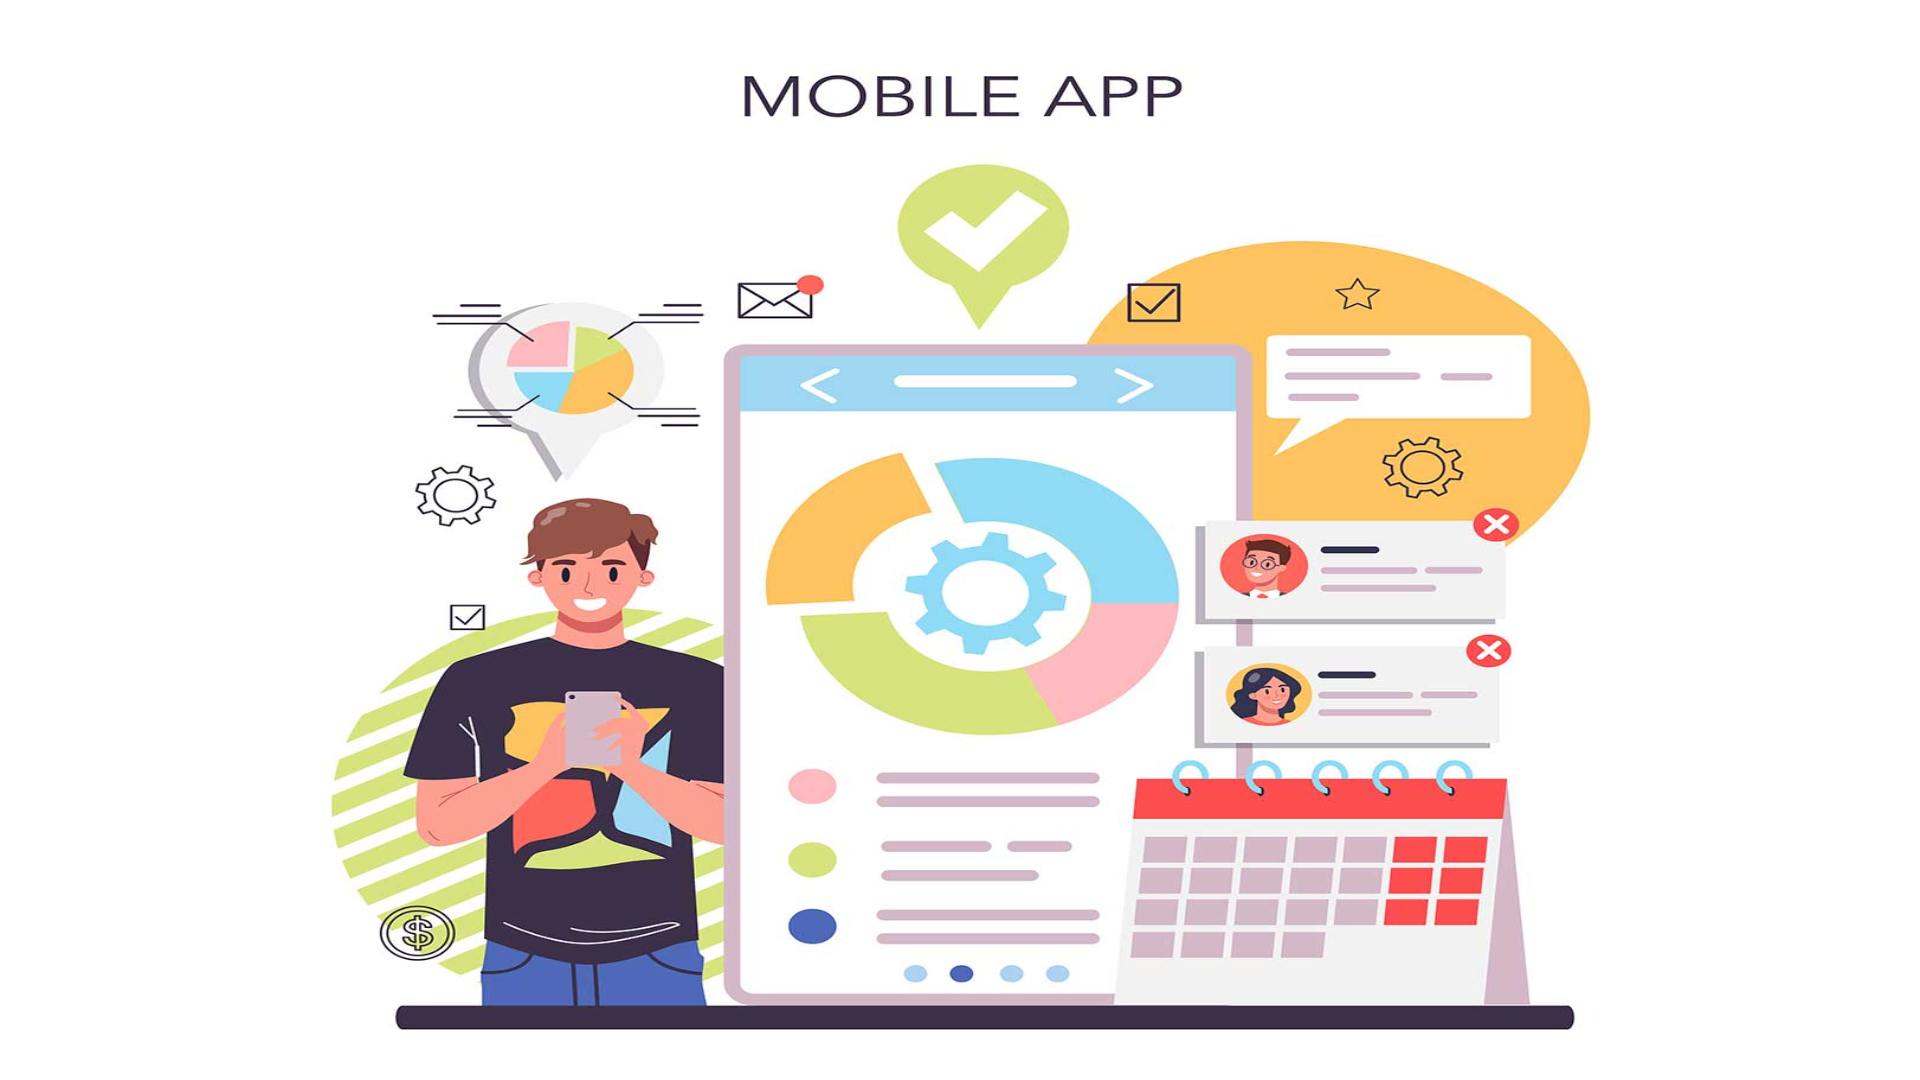 Features of Mobile App